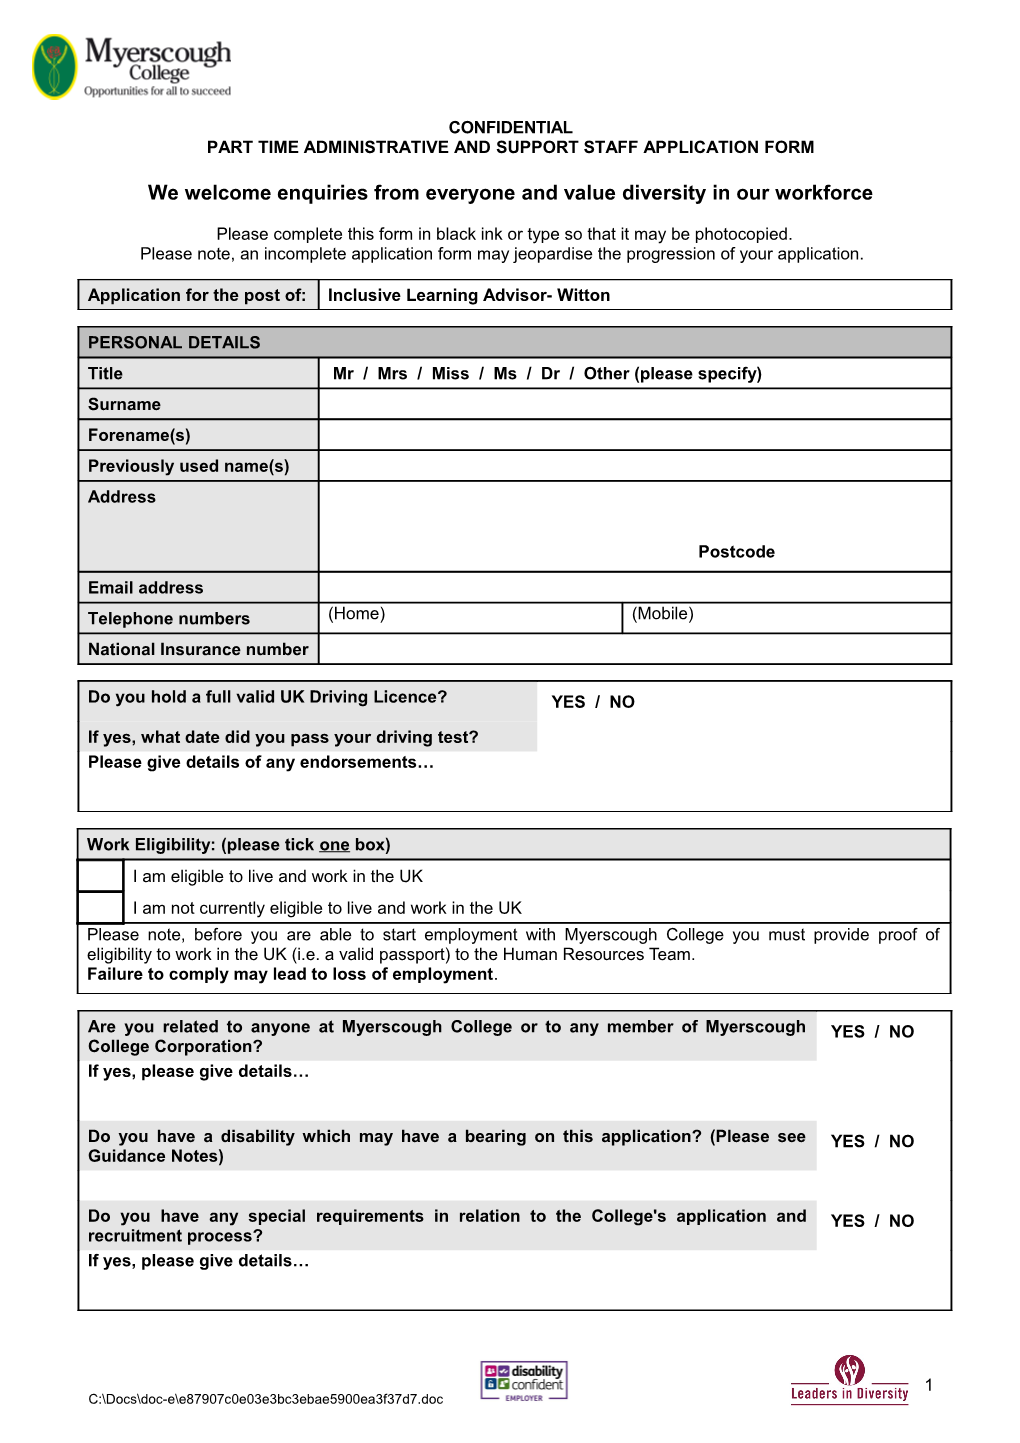 Part Time Administrative and Support Staff Application Form